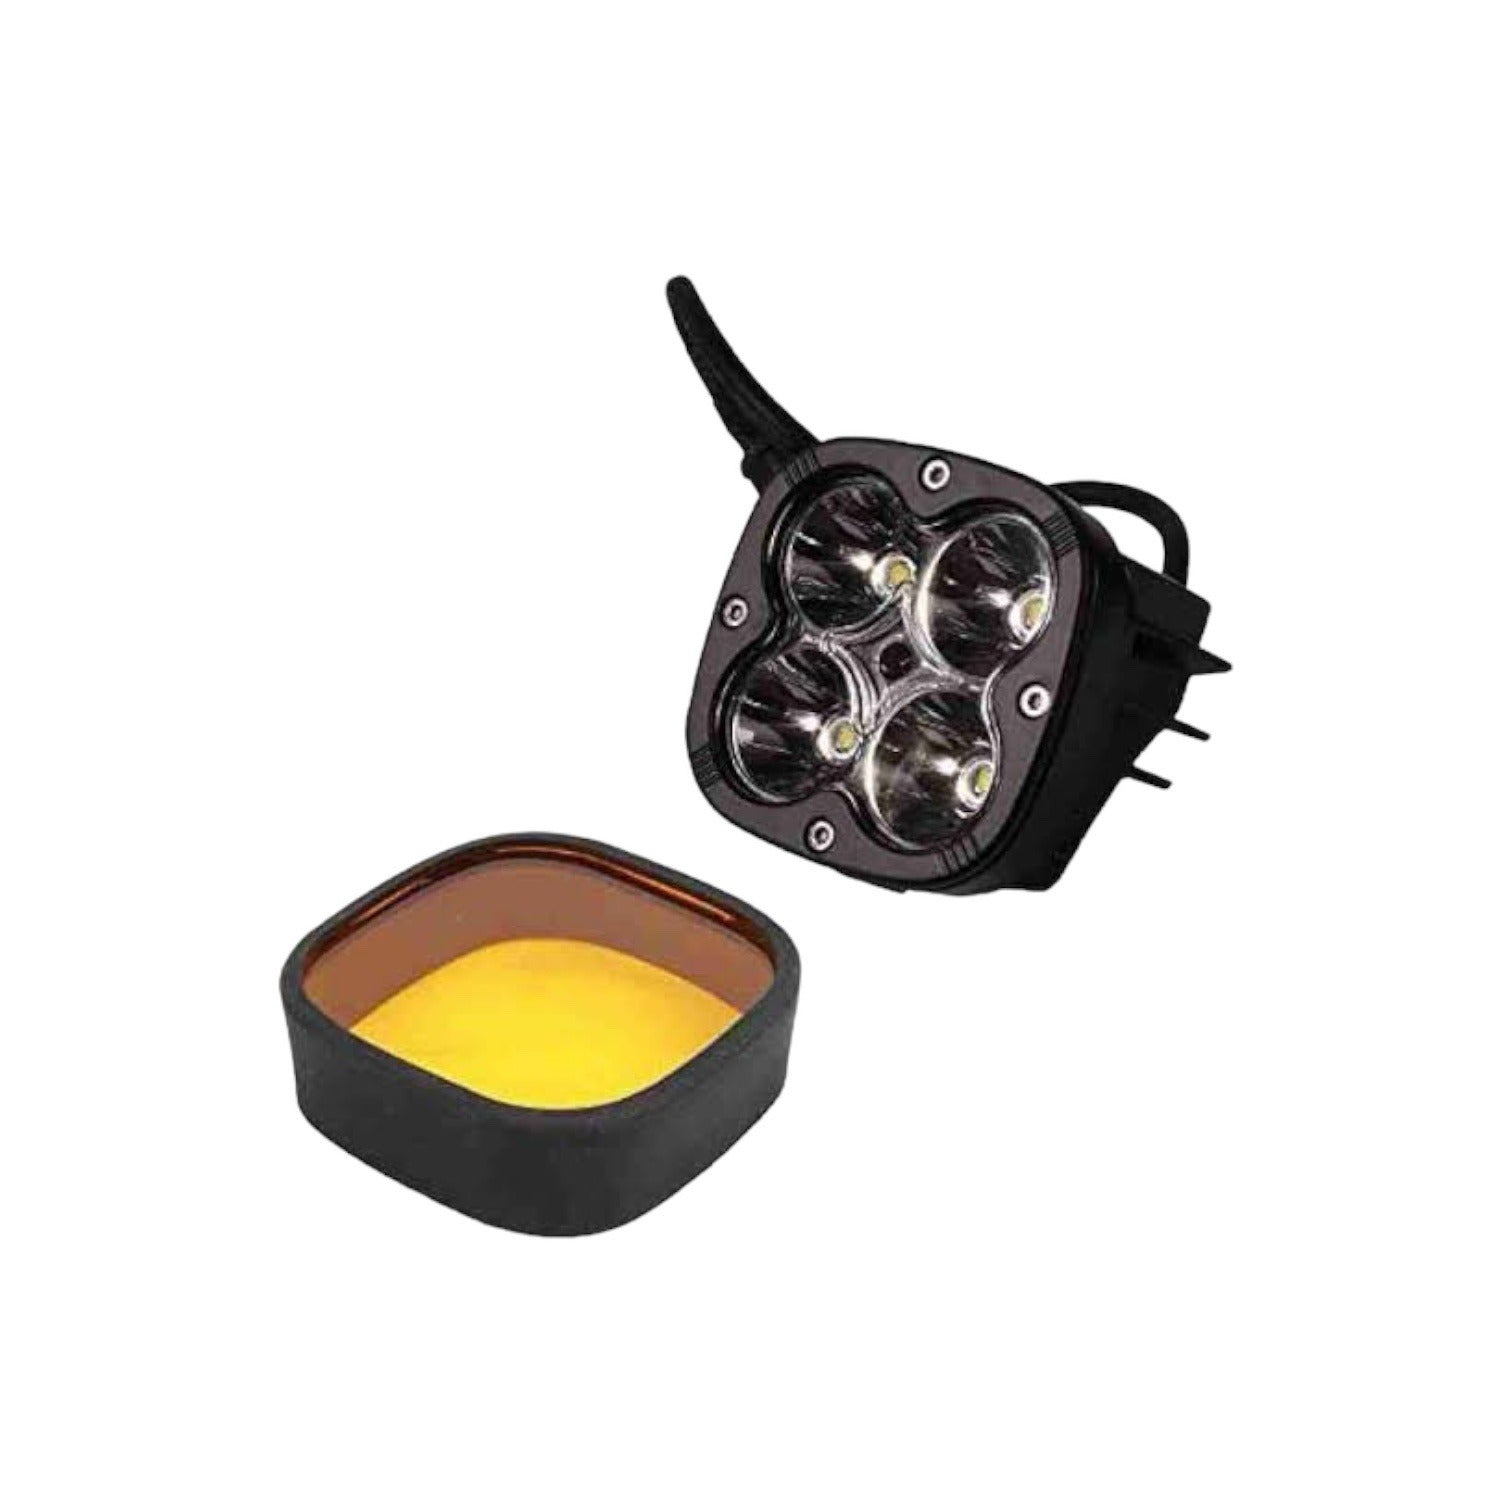 HJG 4x4 LED with Brightness Controller Switch